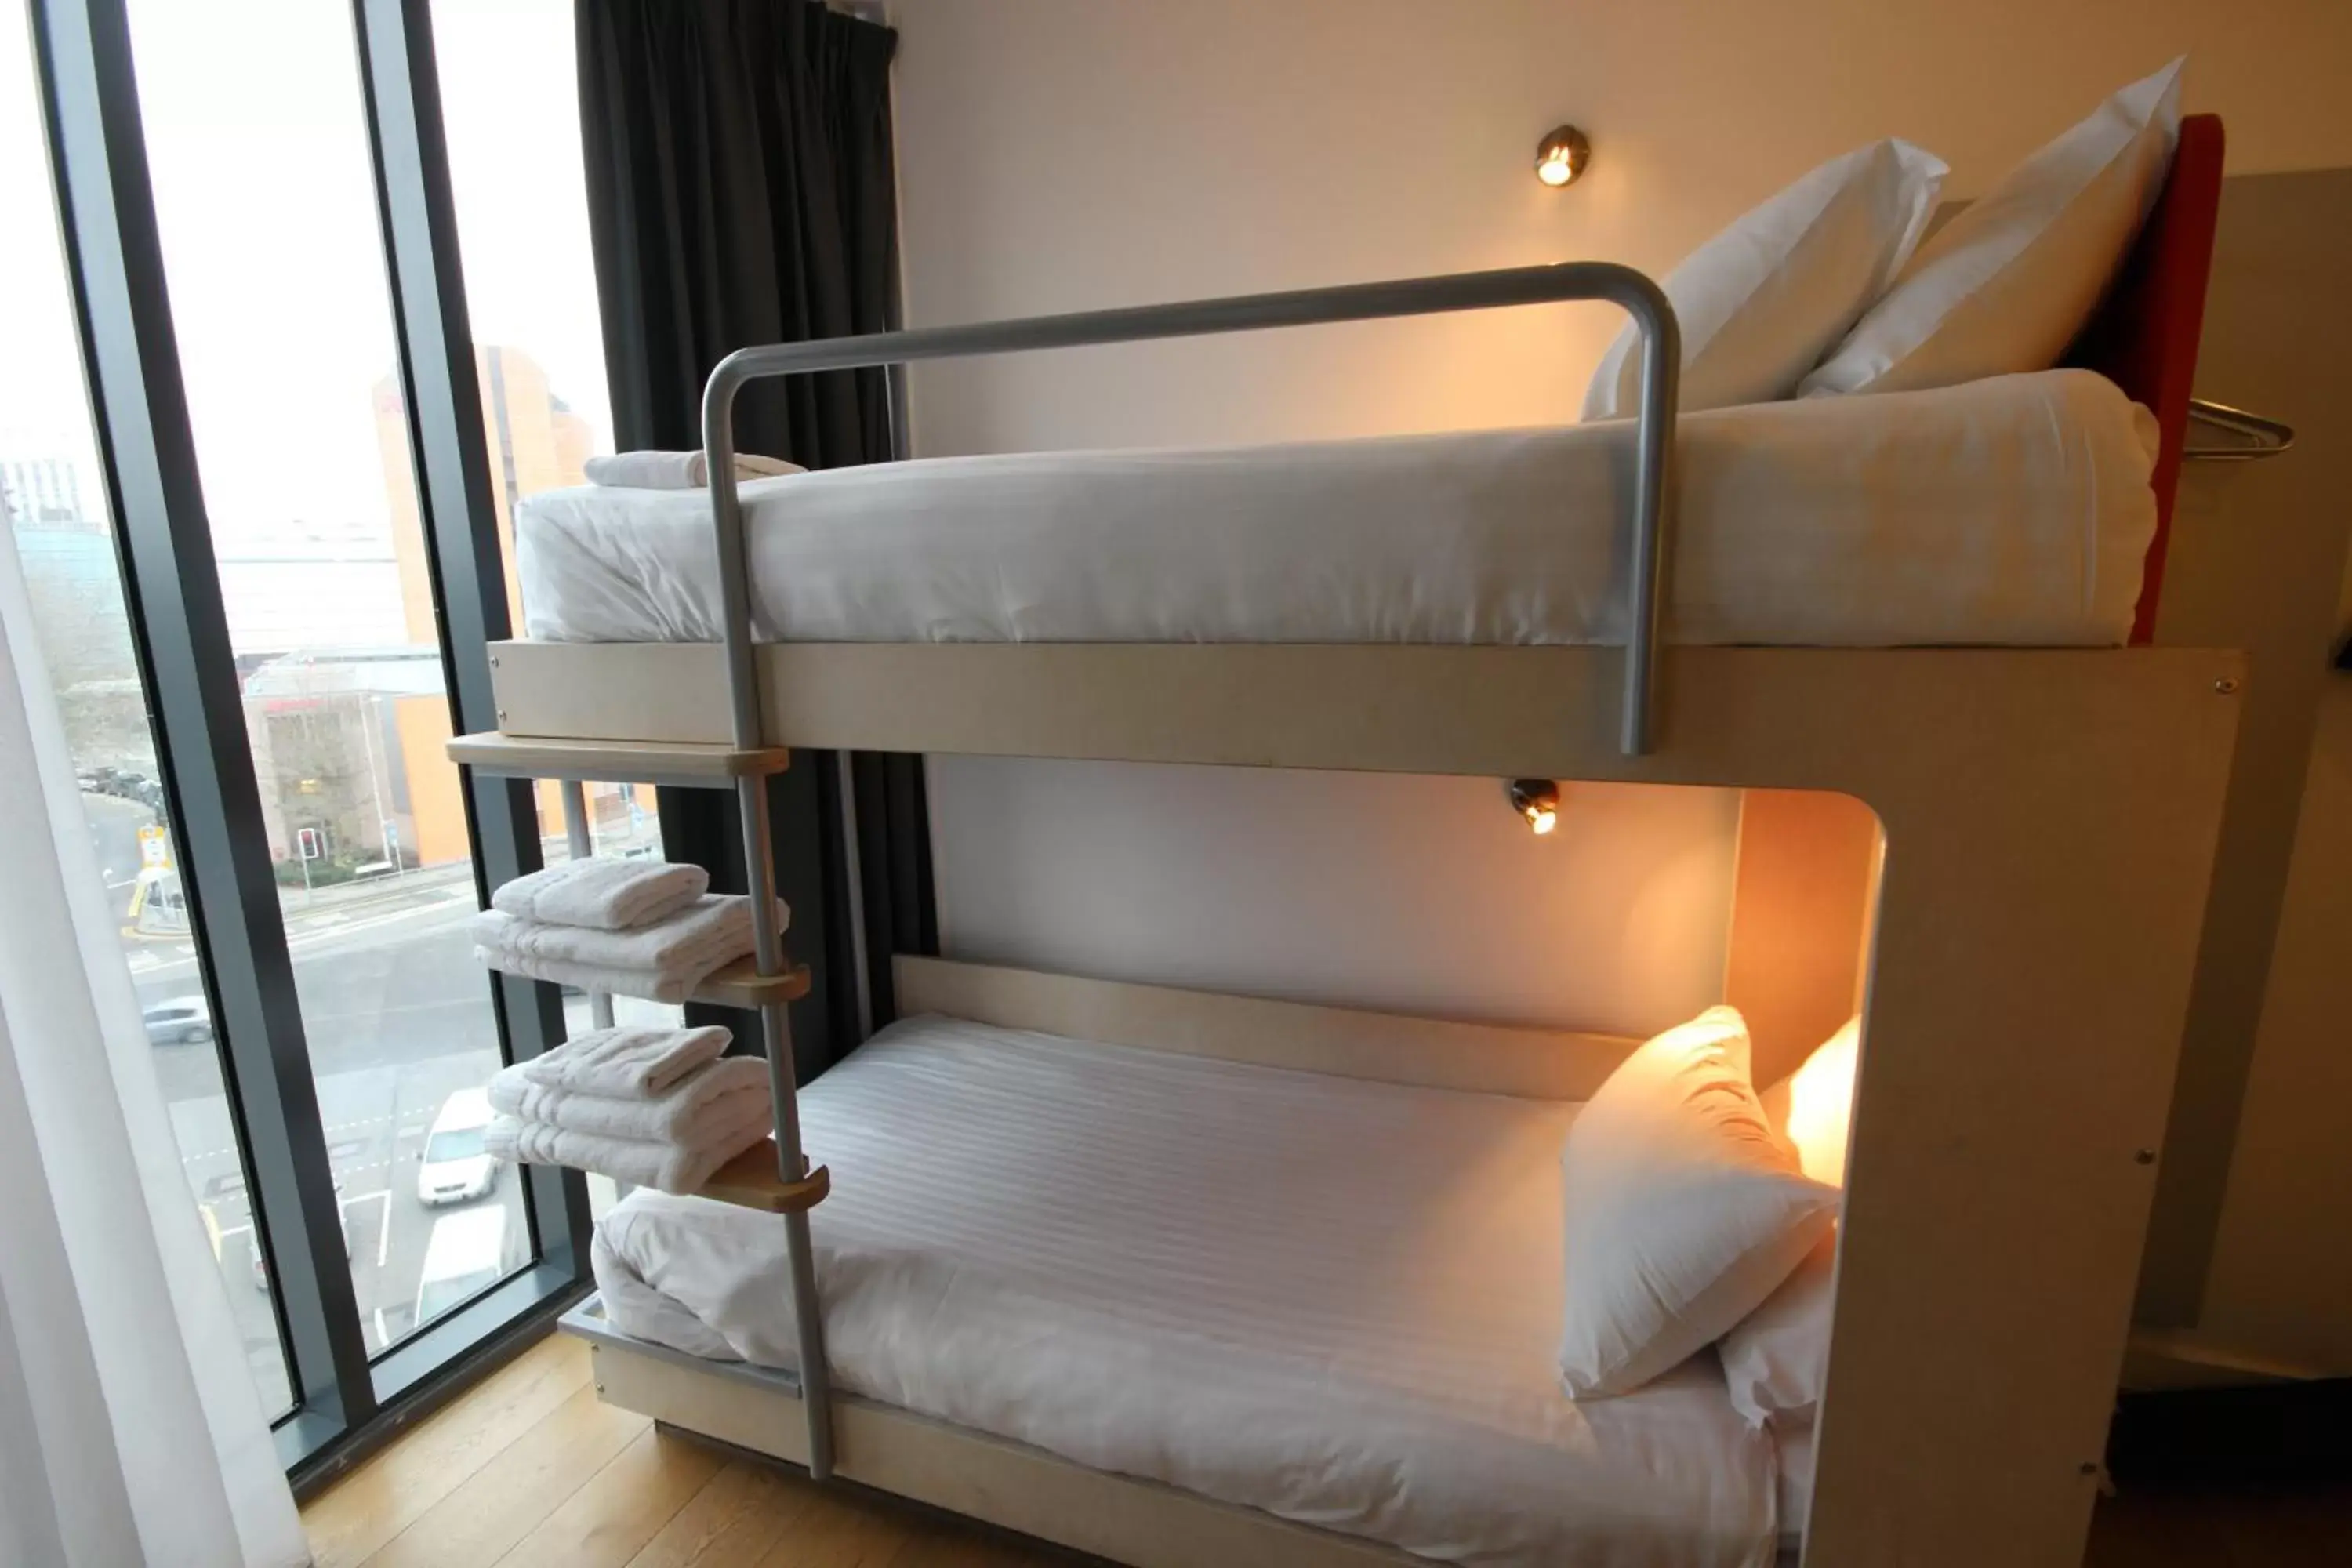 Bunk Bed in Sleeperz Hotel Cardiff